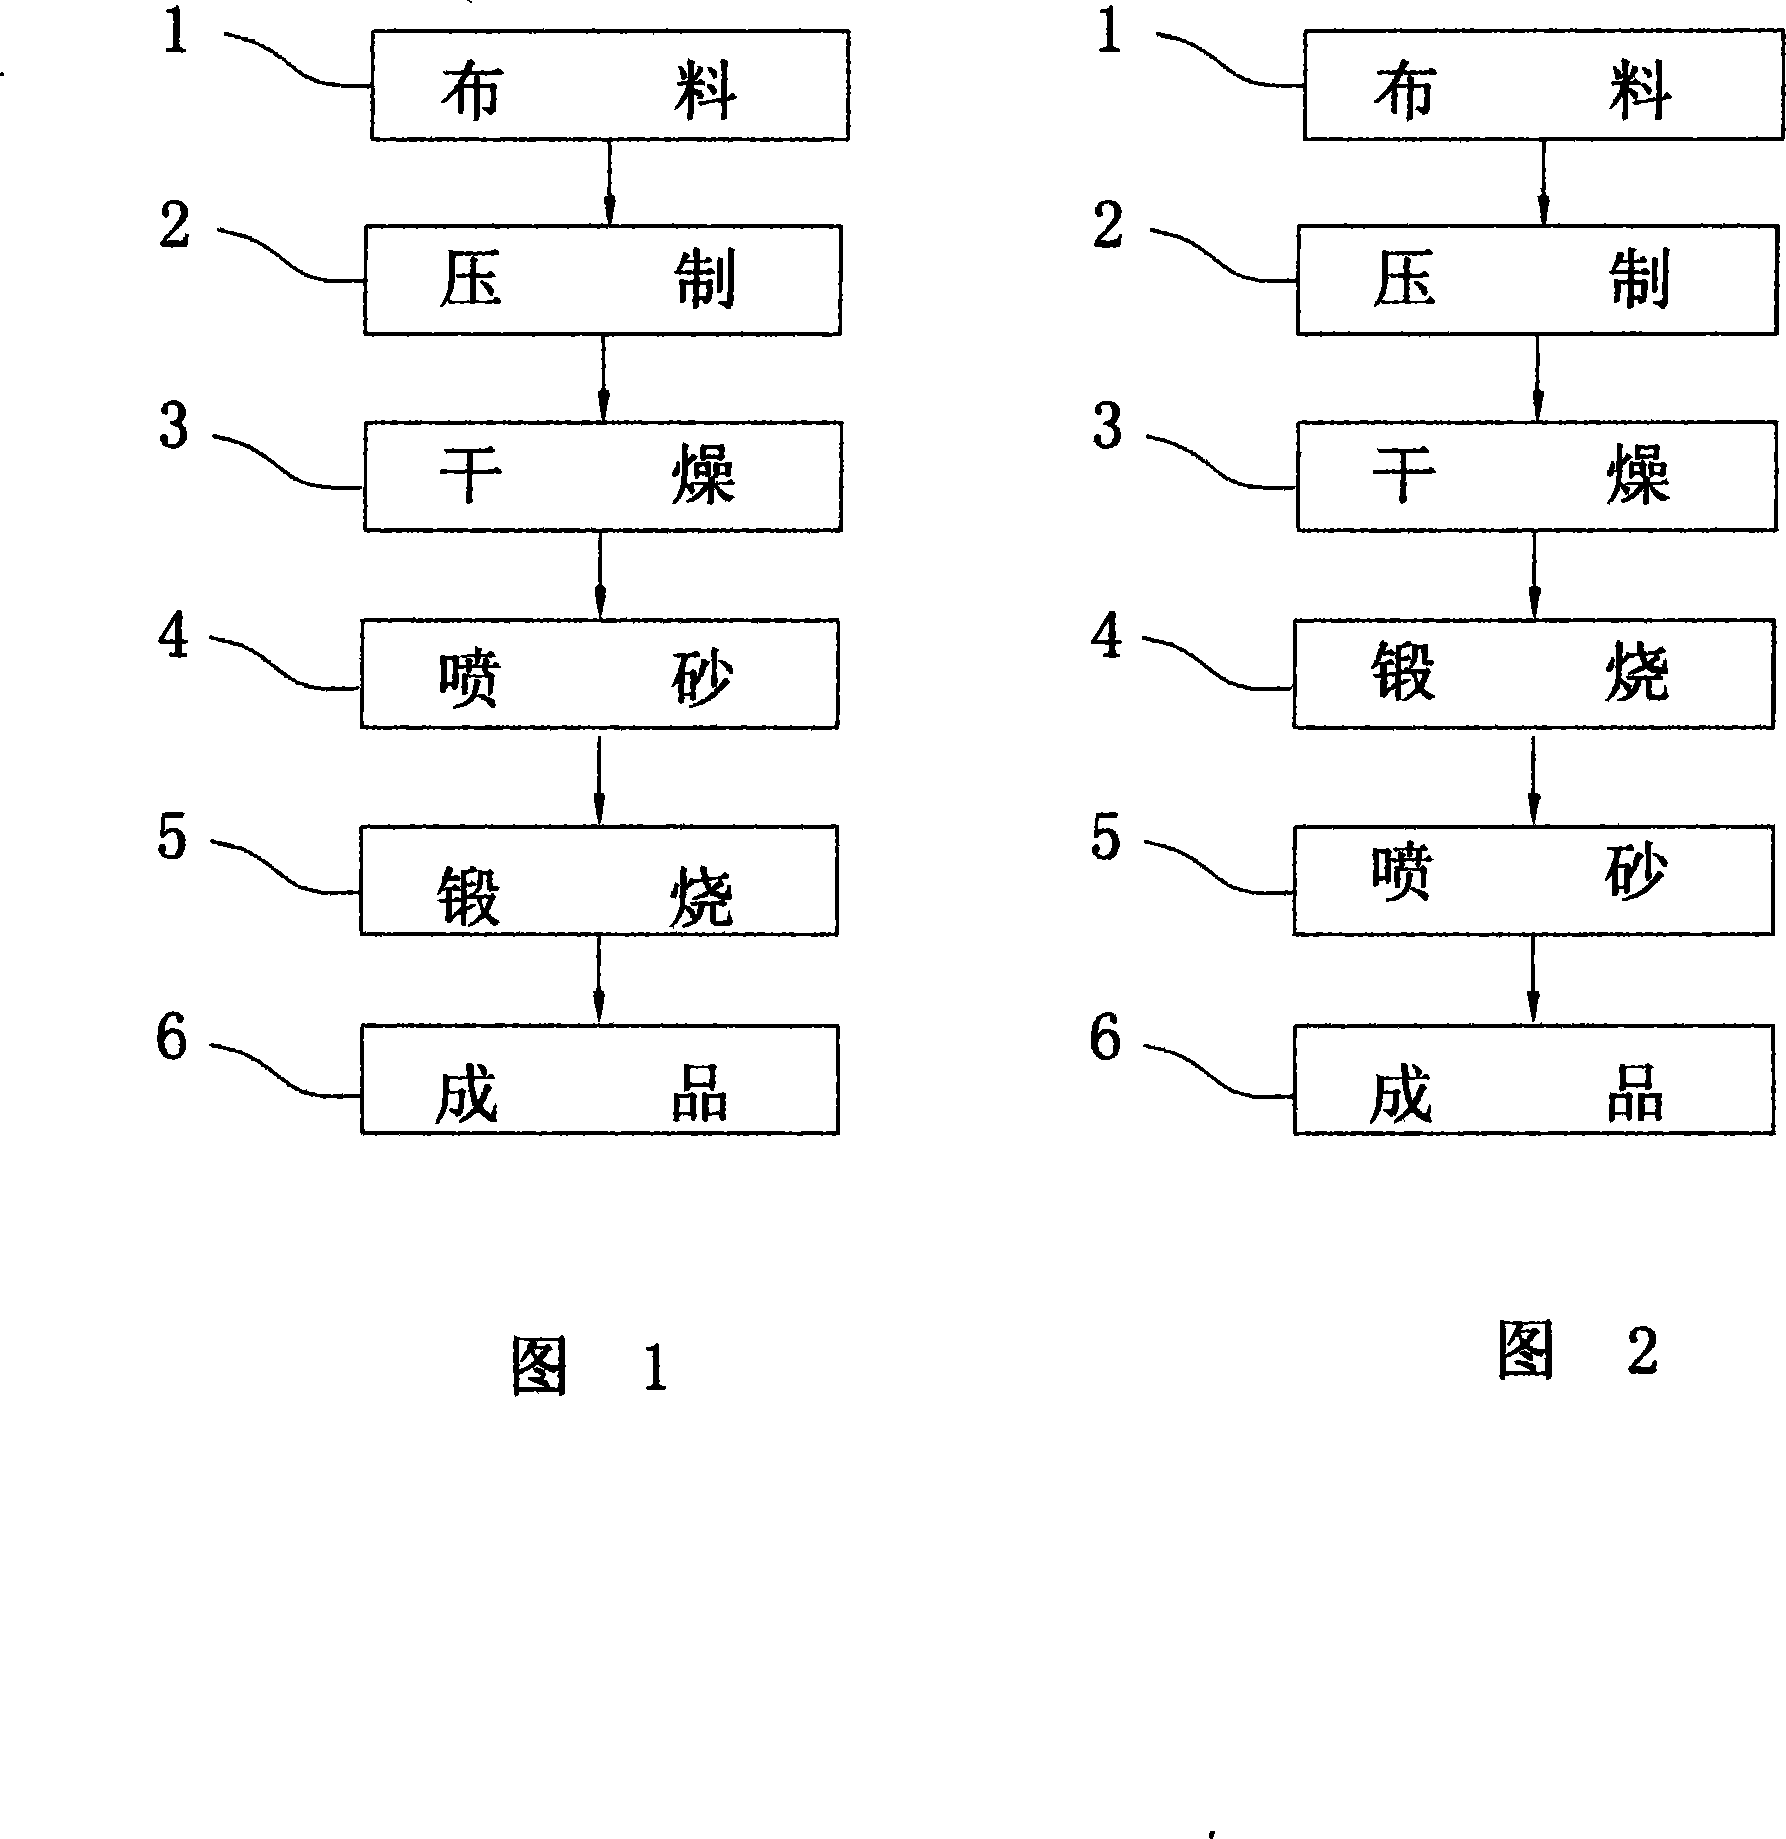 Method for processing ceramic wall and floor tiles